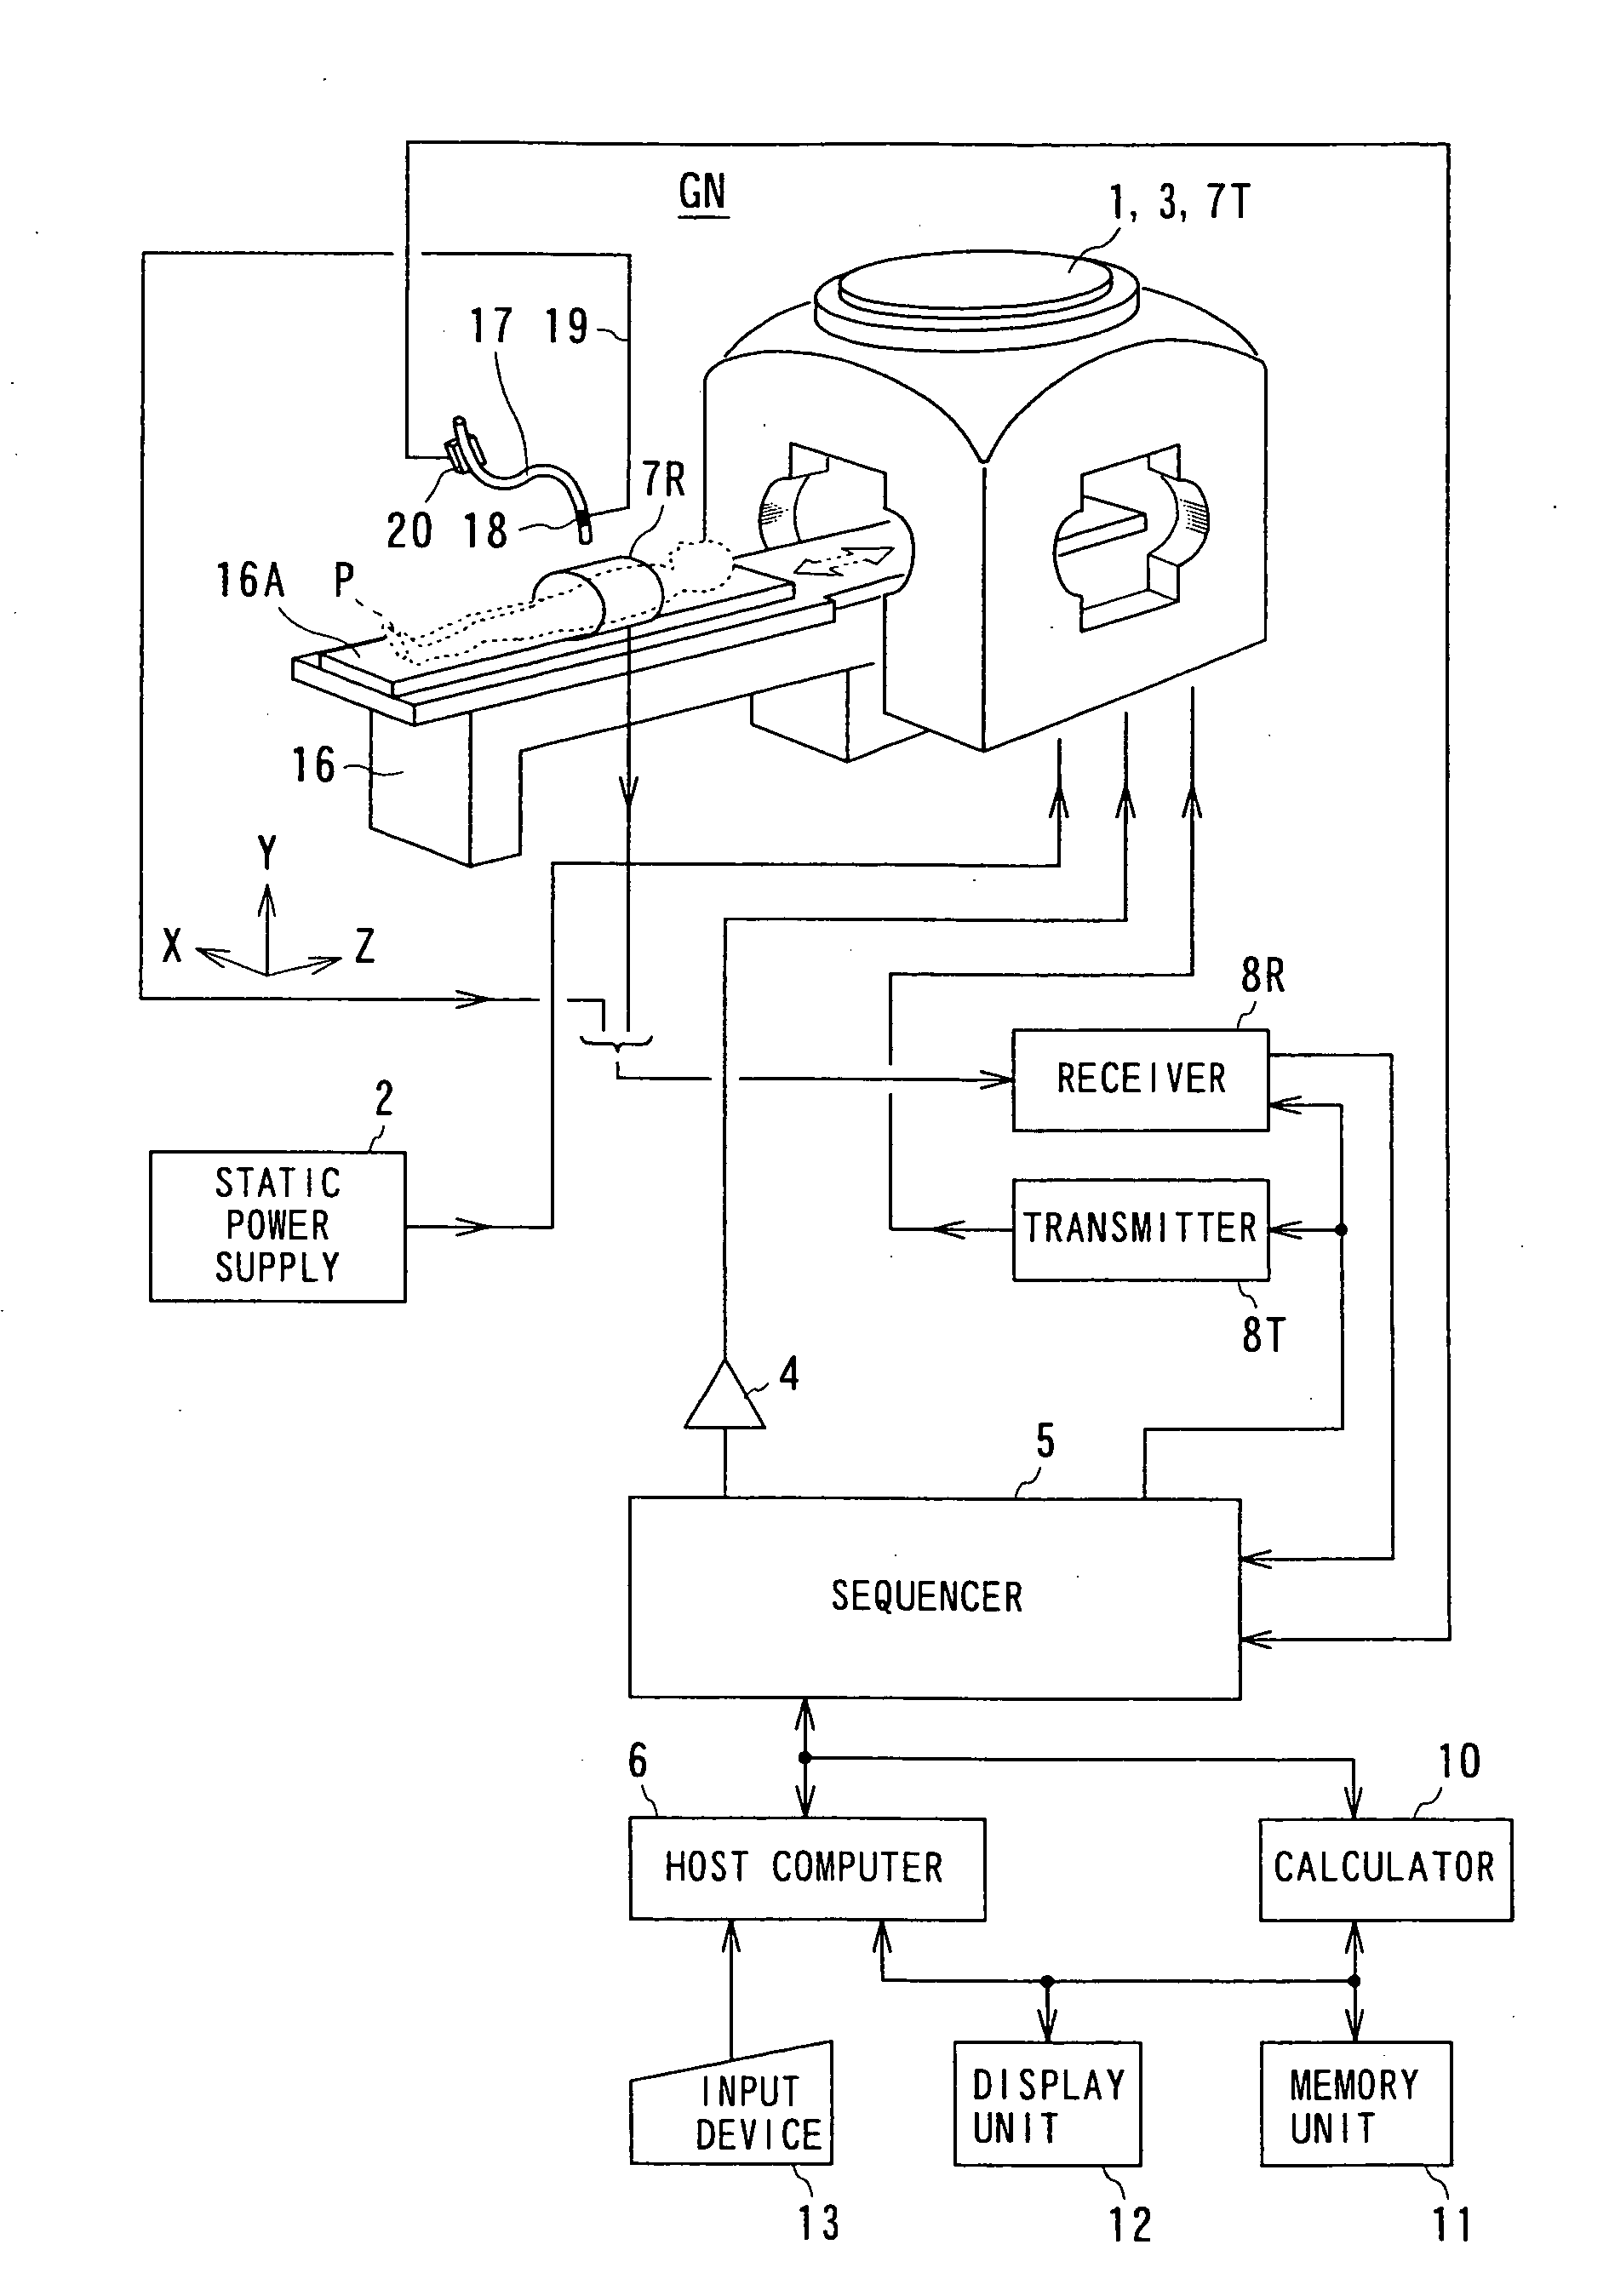 Interventional MR imaging with detection and display of device position